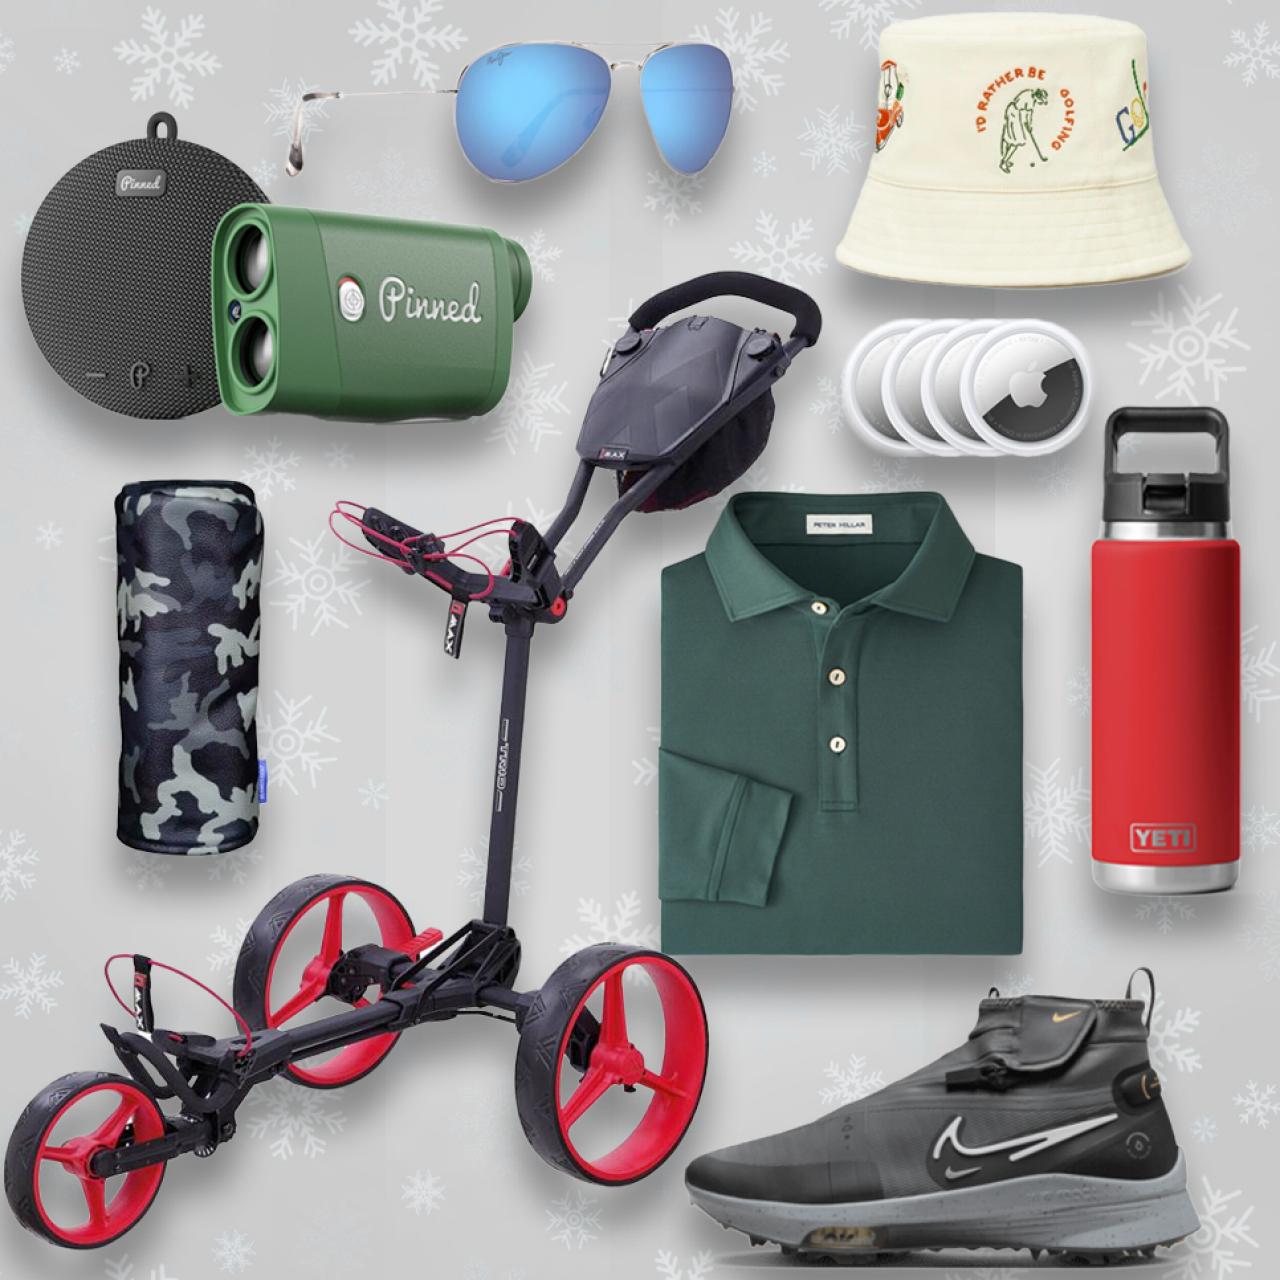 Last-minute gifts for men: Christmas gifts that don't require shipping